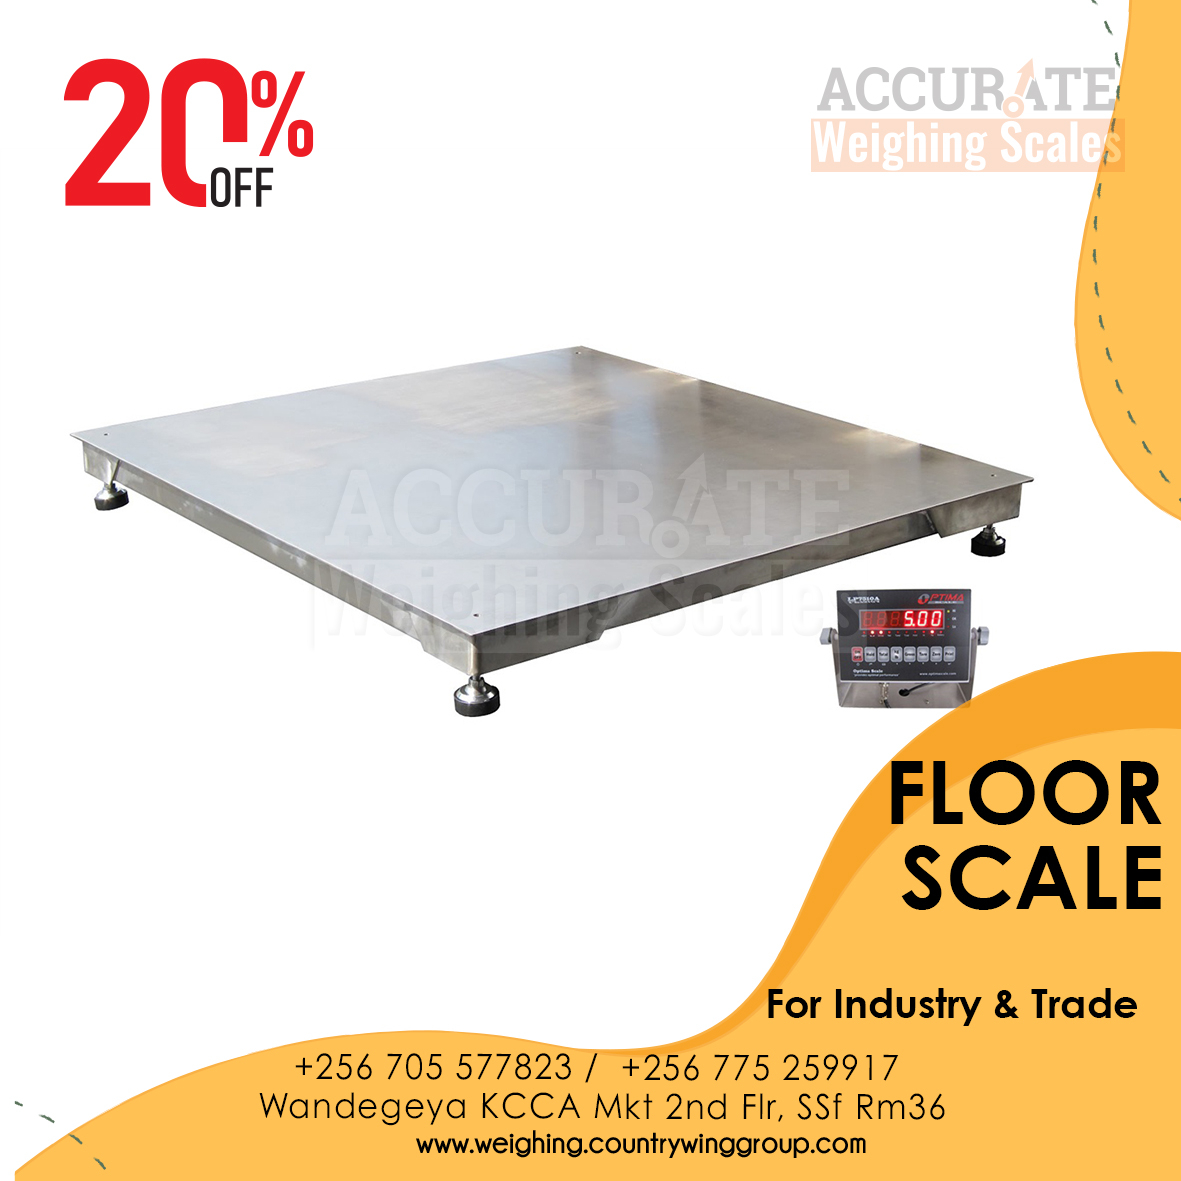 Supplier of platform scales, bench scales and floor scales in Kampala, Kampala, Central, Uganda